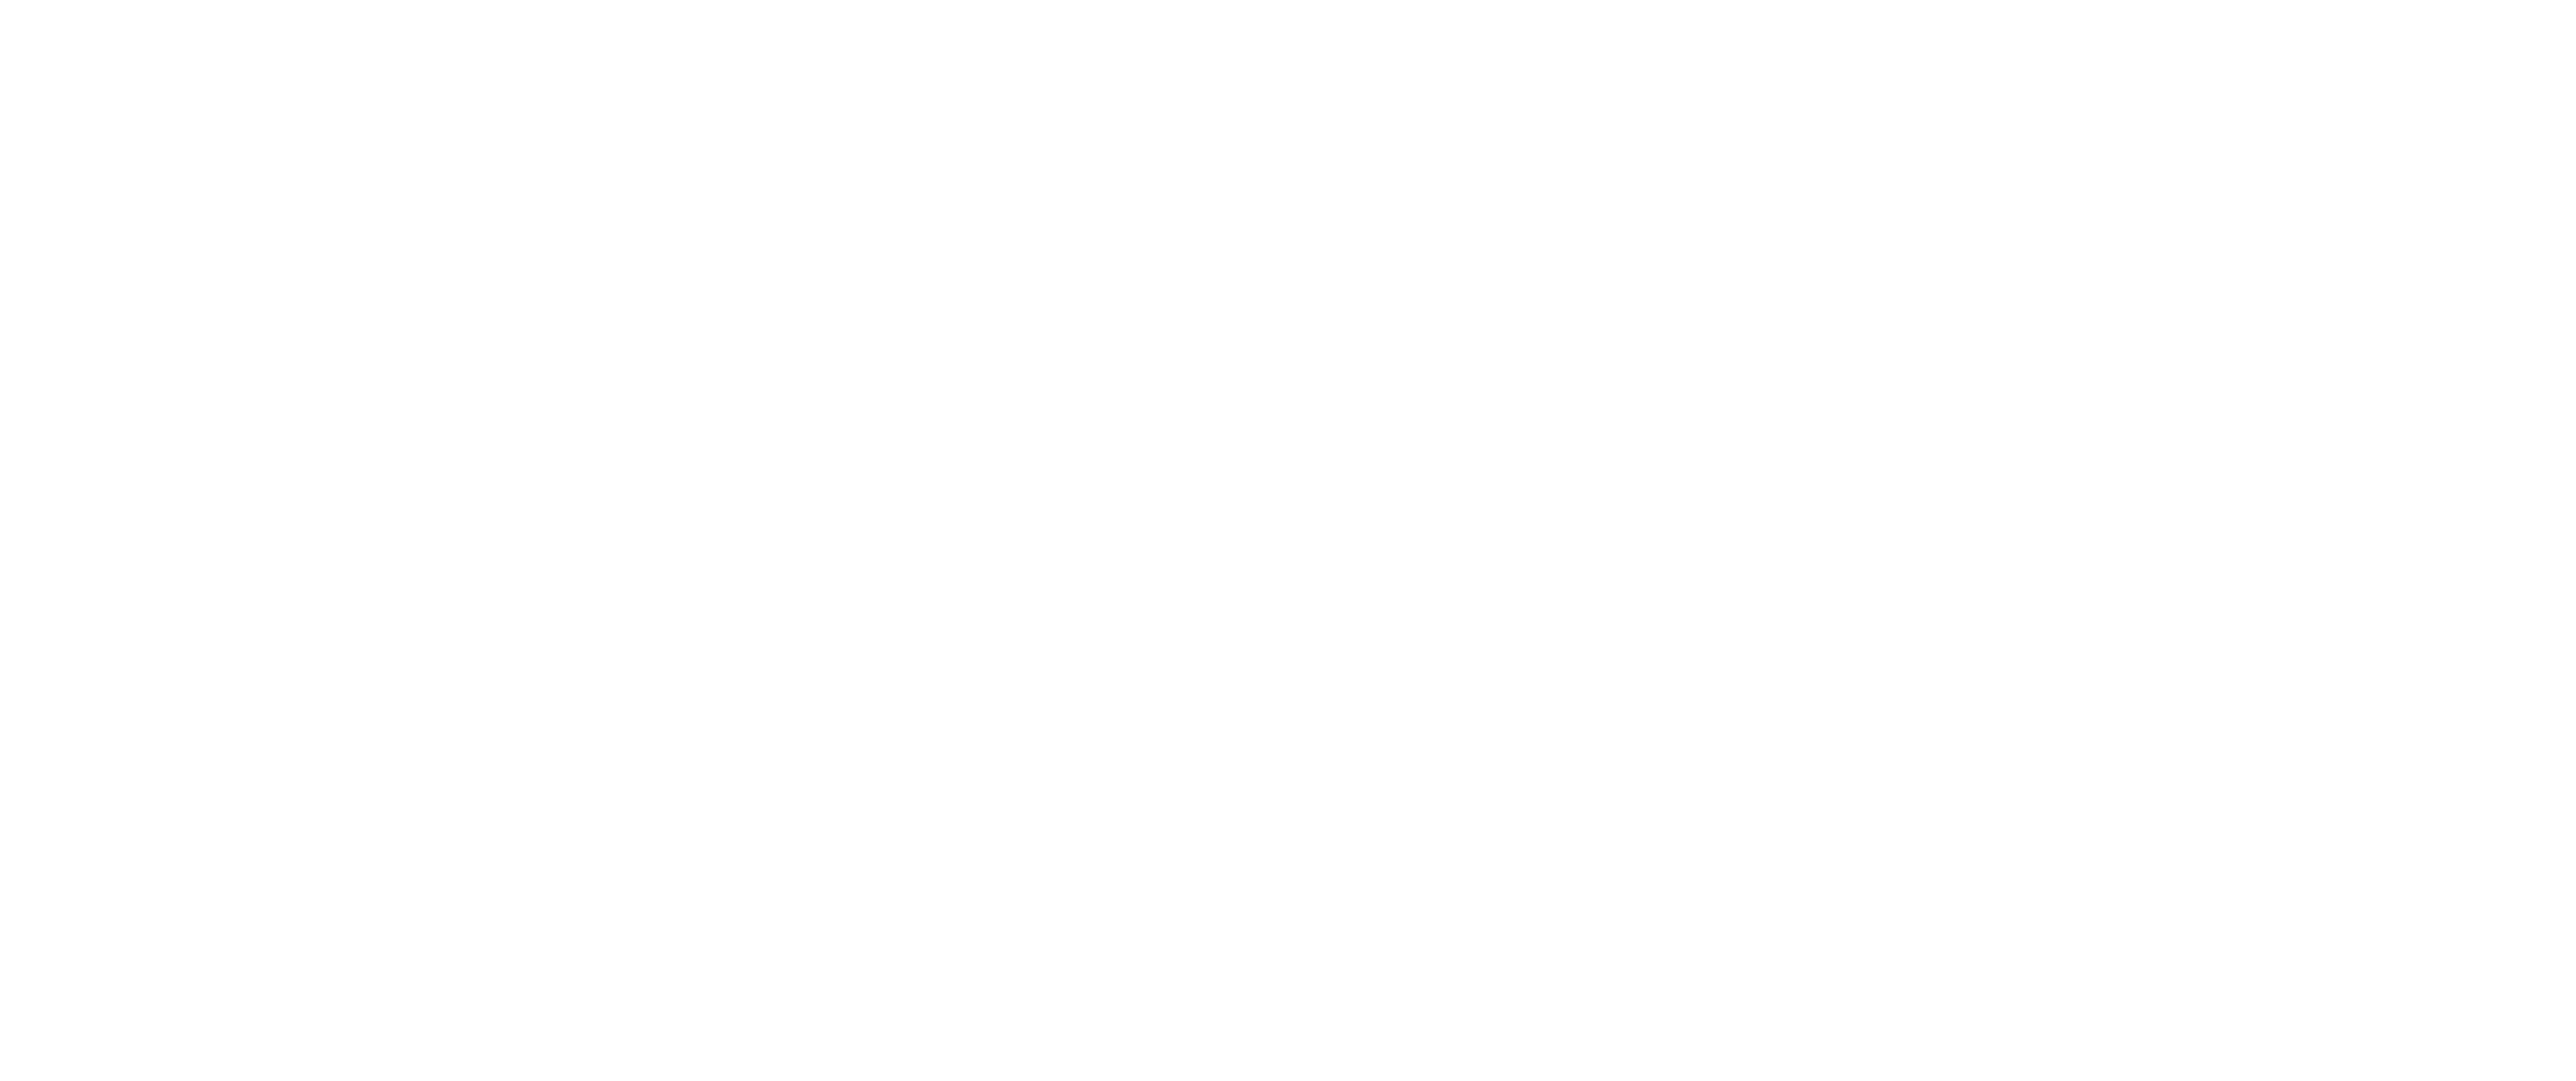 How to install the Artivive App